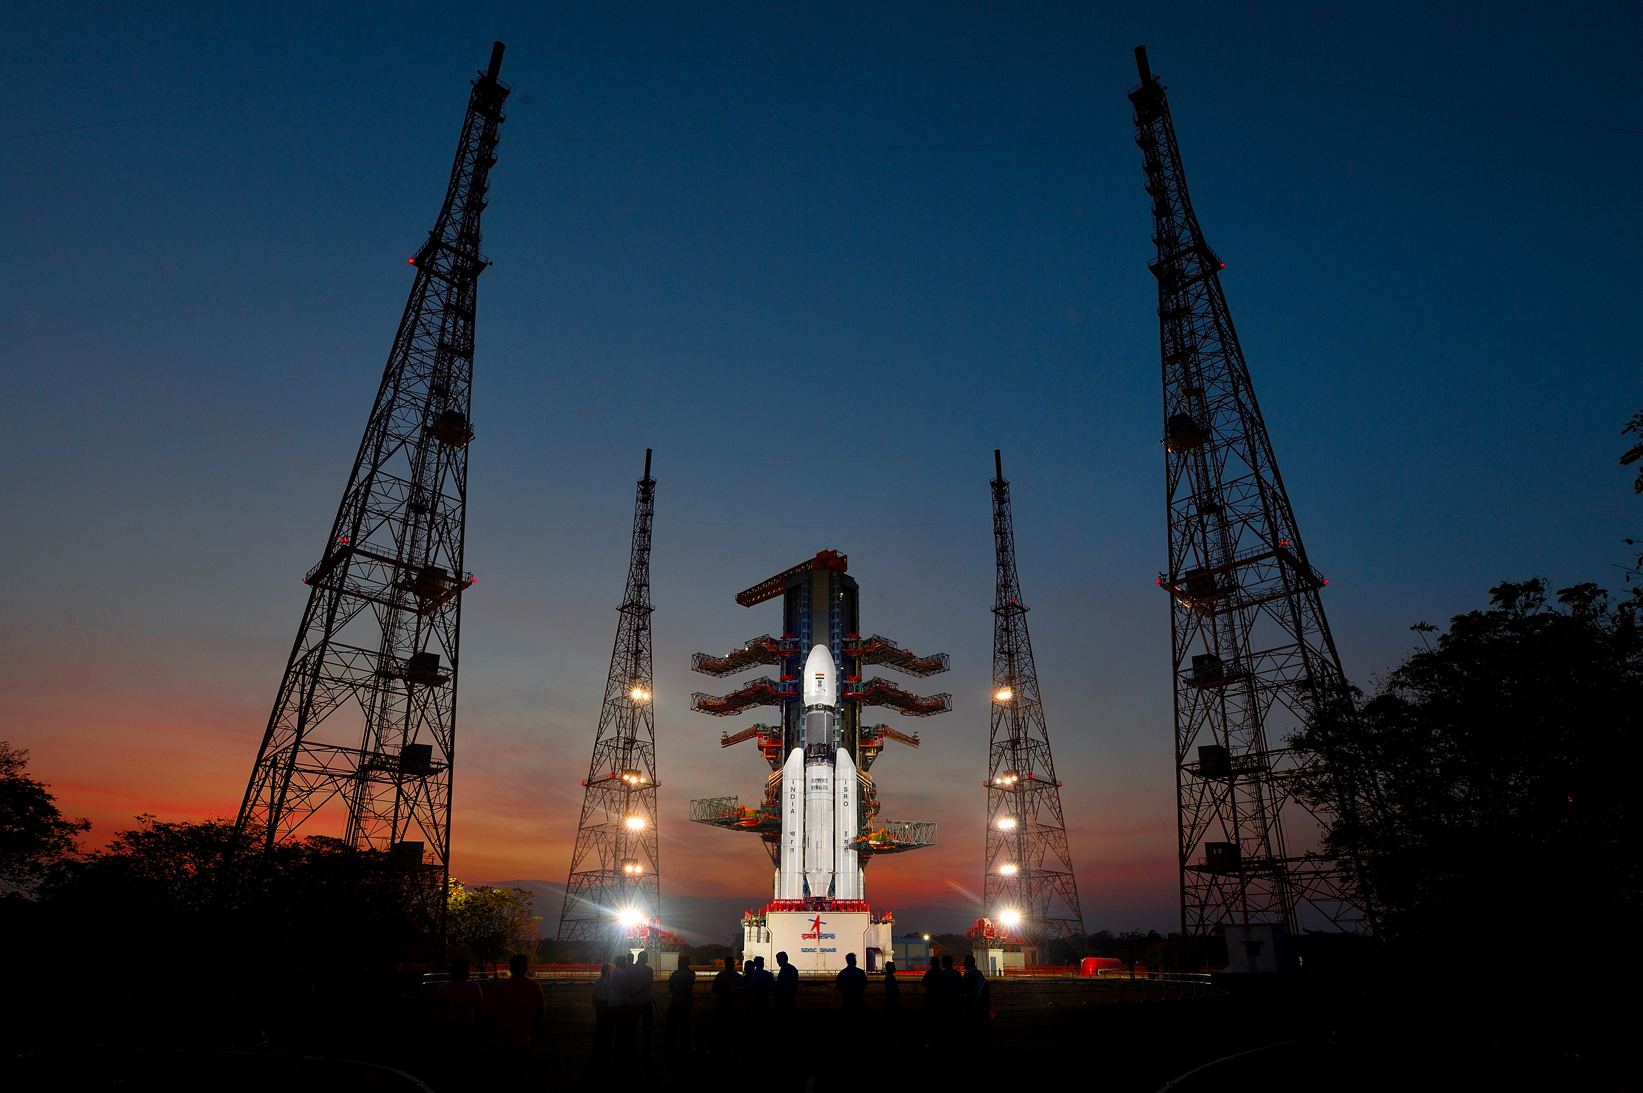 thefullyintegratedgslv-mkiii-d1carryinggsat-19atthesecondlaunchpad-anotherview.jpg